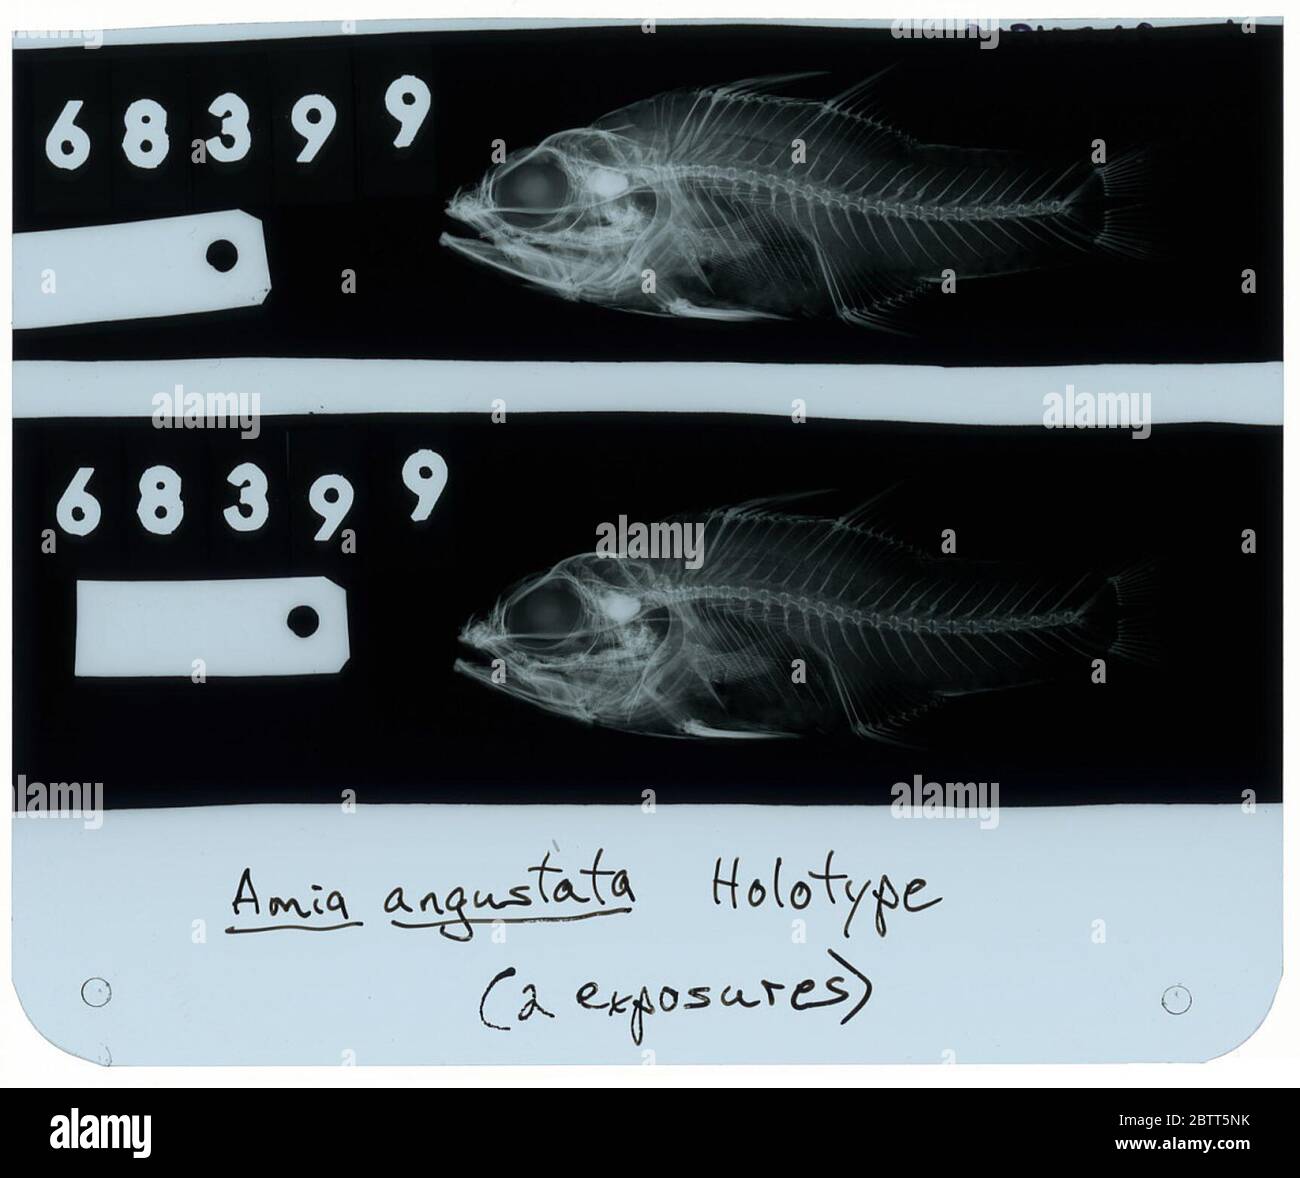 Amia angustata. Radiograph is of a type; The Smithsonian NMNH Division of Fishes uses the convention of maintaining the original species name for type specimens designated at the time of description. The currently accepted name for this species is Ostorhinchus angustatus.25 Oct 20181 Stock Photo